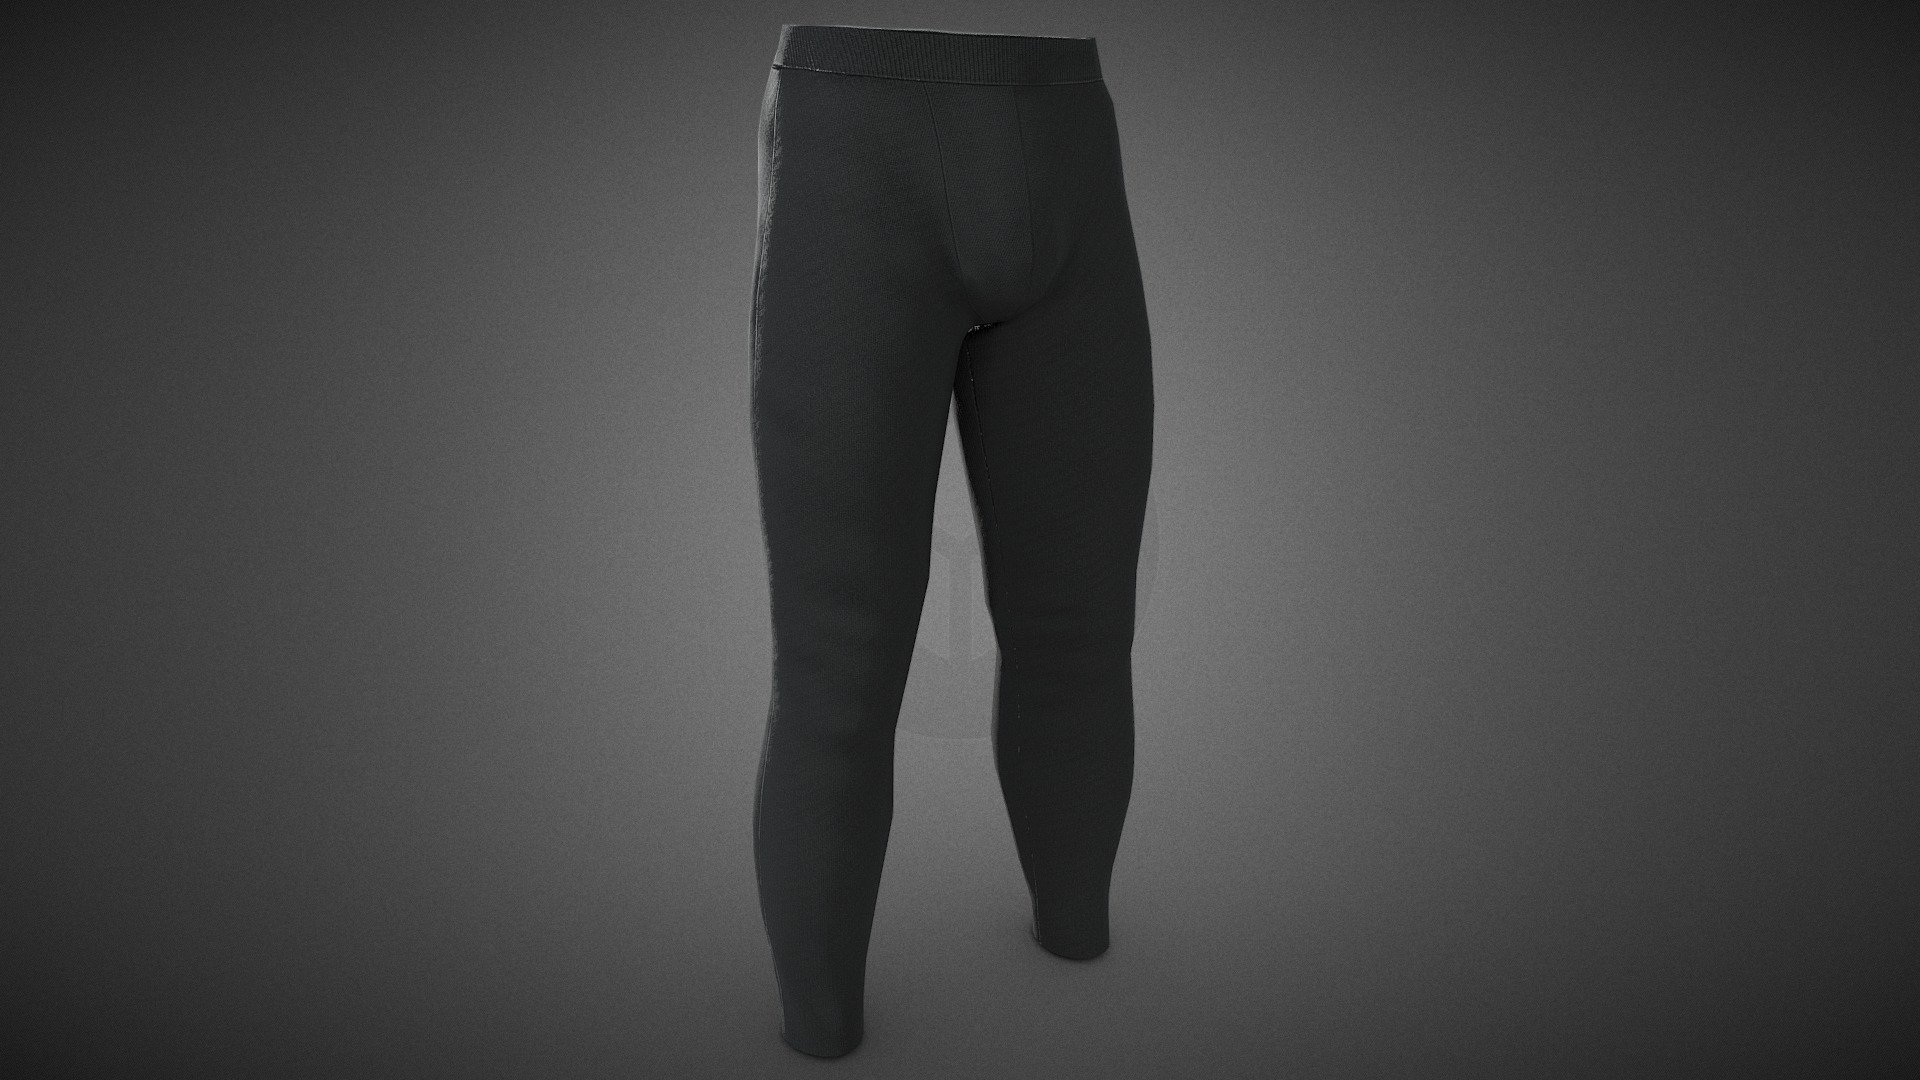 CG StudioX Present :
Black Skinny Medieval Pants lowpoly/PBR




This is Black Skinny Medieval Pants Comes with Specular and Metalness PBR.

The photo been rendered using Marmoset Toolbag 4 (real time game engine )


Features :



Comes with Specular and Metalness PBR 4K texture .

Good topology.

Low polygon geometry.

The Model is prefect for game for both Specular workflow as in Unity and Metalness as in Unreal engine .

The model also rendered using Marmoset Toolbag 4 with both Specular and Metalness PBR and also included in the product with the full texture.

The texture can be easily adjustable .


Texture :



One set of UV [Albedo -Normal-Metalness -Roughness-Gloss-Specular-Ao] (4096*4096)


Files :
Marmoset Toolbag 4 ,Maya,,FBX,OBj with all the textures.




Contact me for if you have any questions.
 - Black Skinny Medieval Pants - Buy Royalty Free 3D model by CG StudioX (@CG_StudioX) 3d model